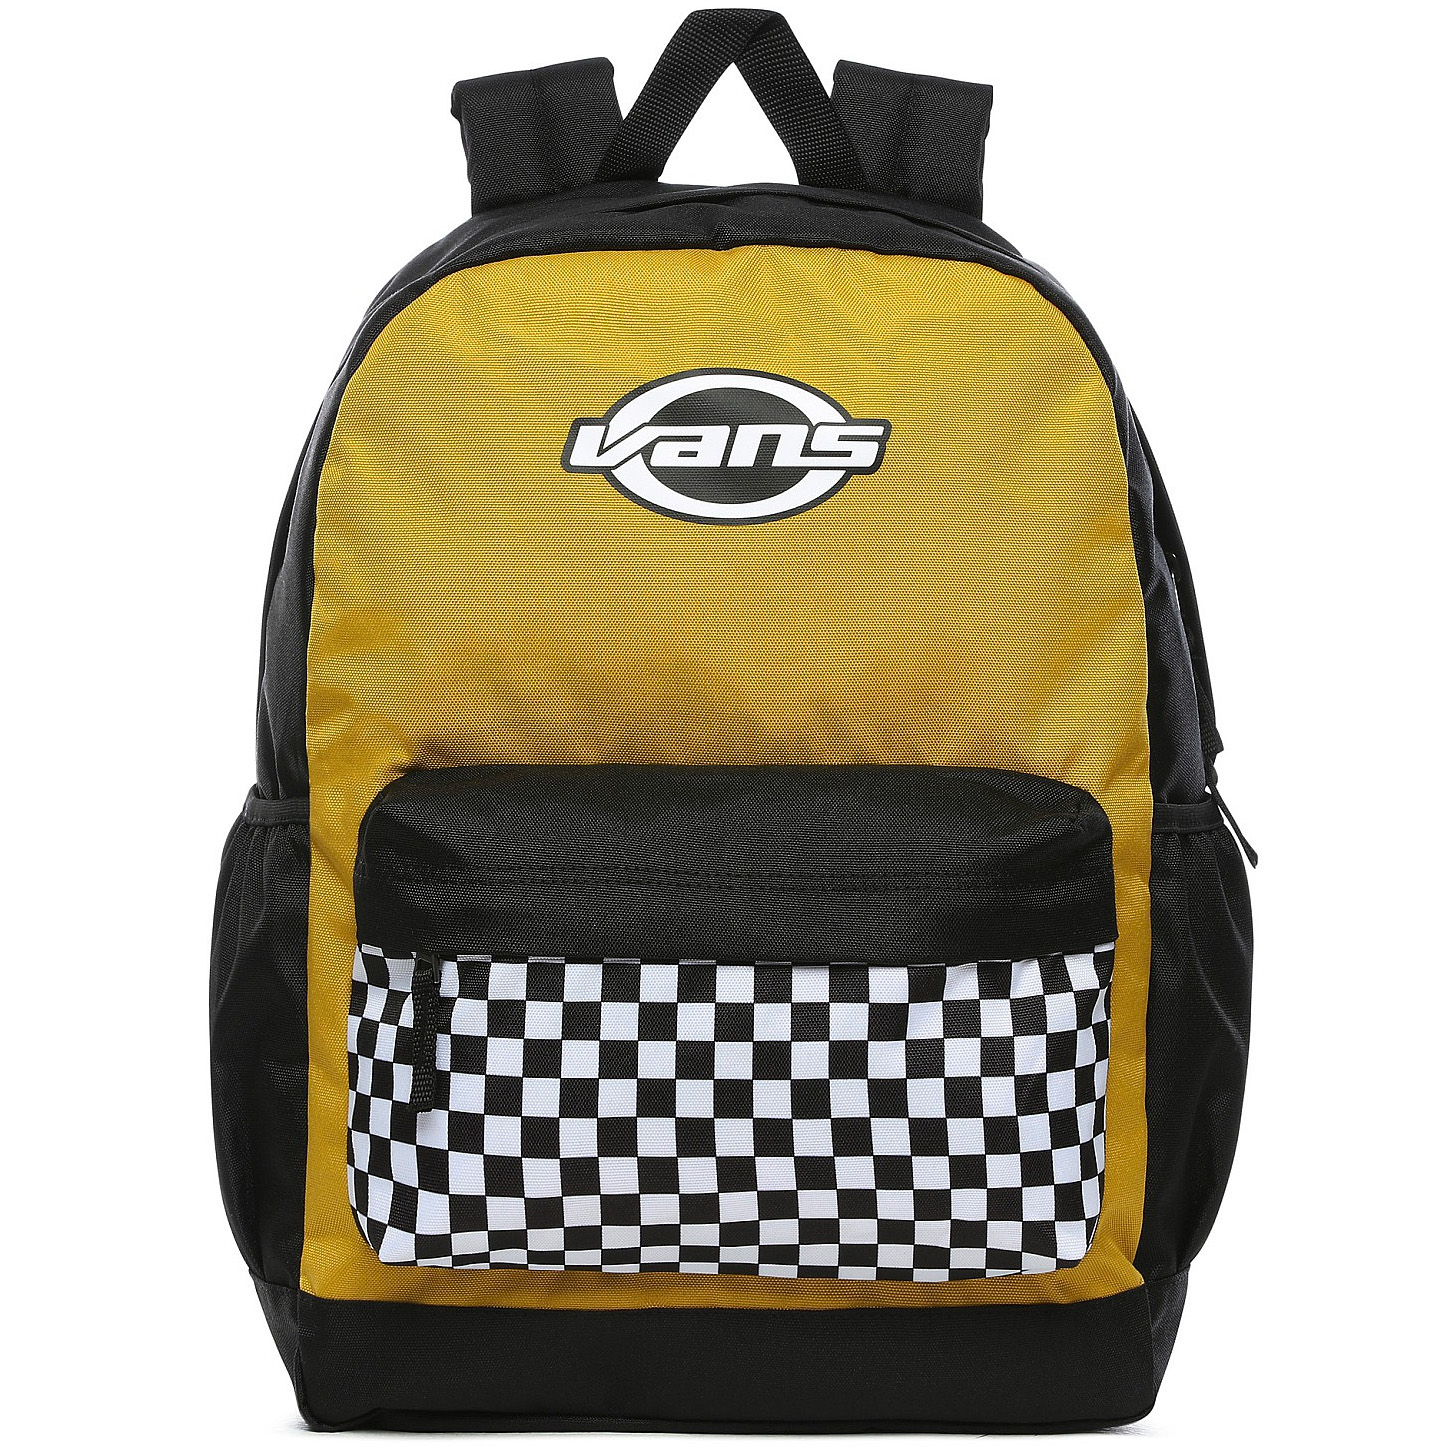 Vans SPORTY REALM PLUS BACKPACK FW21 